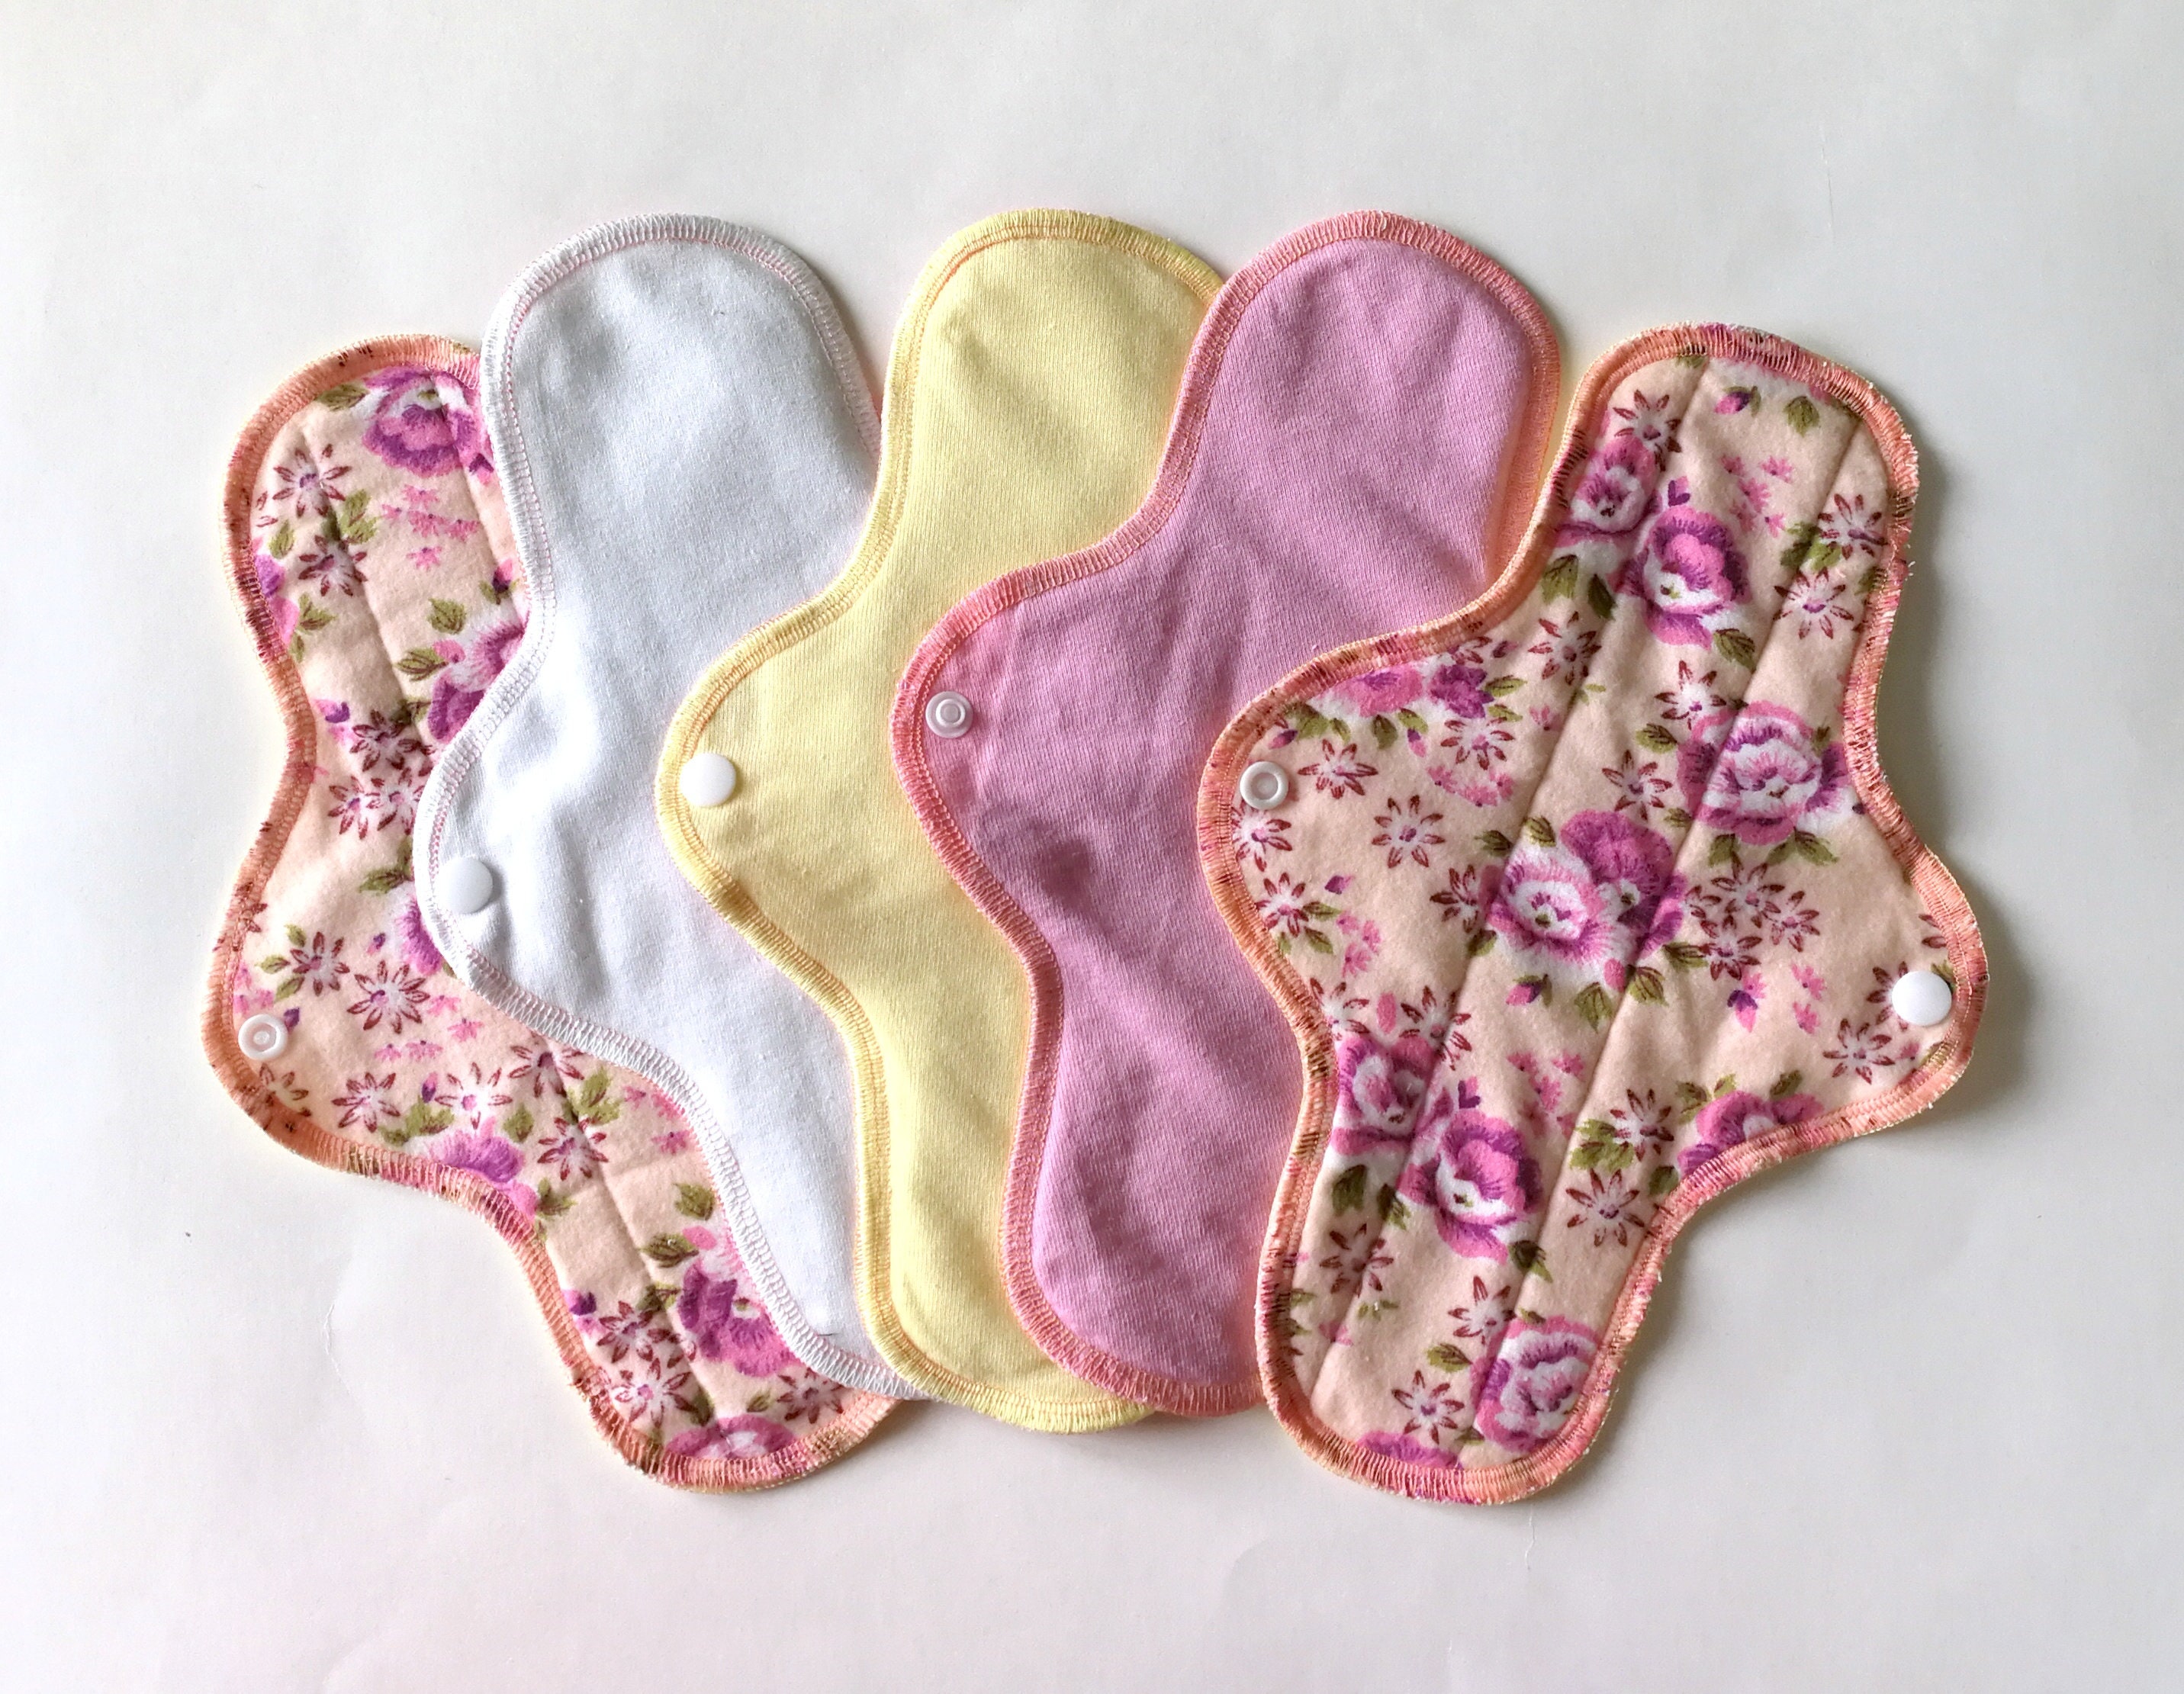 100% Cotton Menstrual Pads/ Leak Proof Reusable Feminine Cloth Pads/ Zero  Waste Highly Absorbent Washable Panty Liner Sanitary Ladies Towels -   Canada